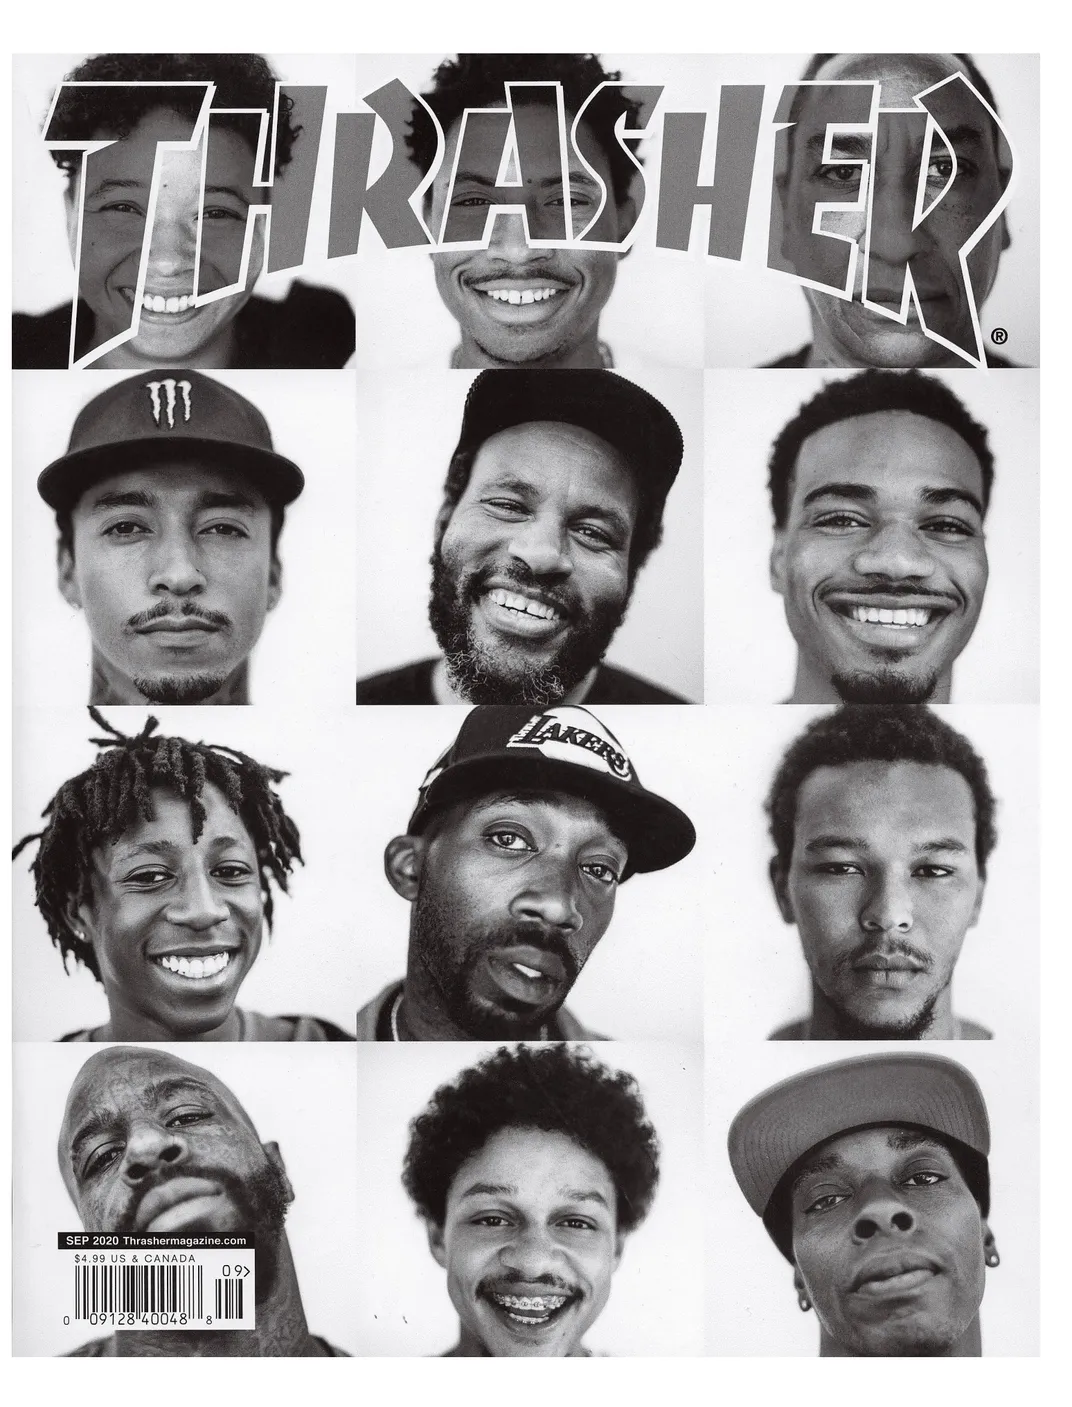 A black and white September 2020 cover of Thrasher Magazine featuring Black skateboarders.